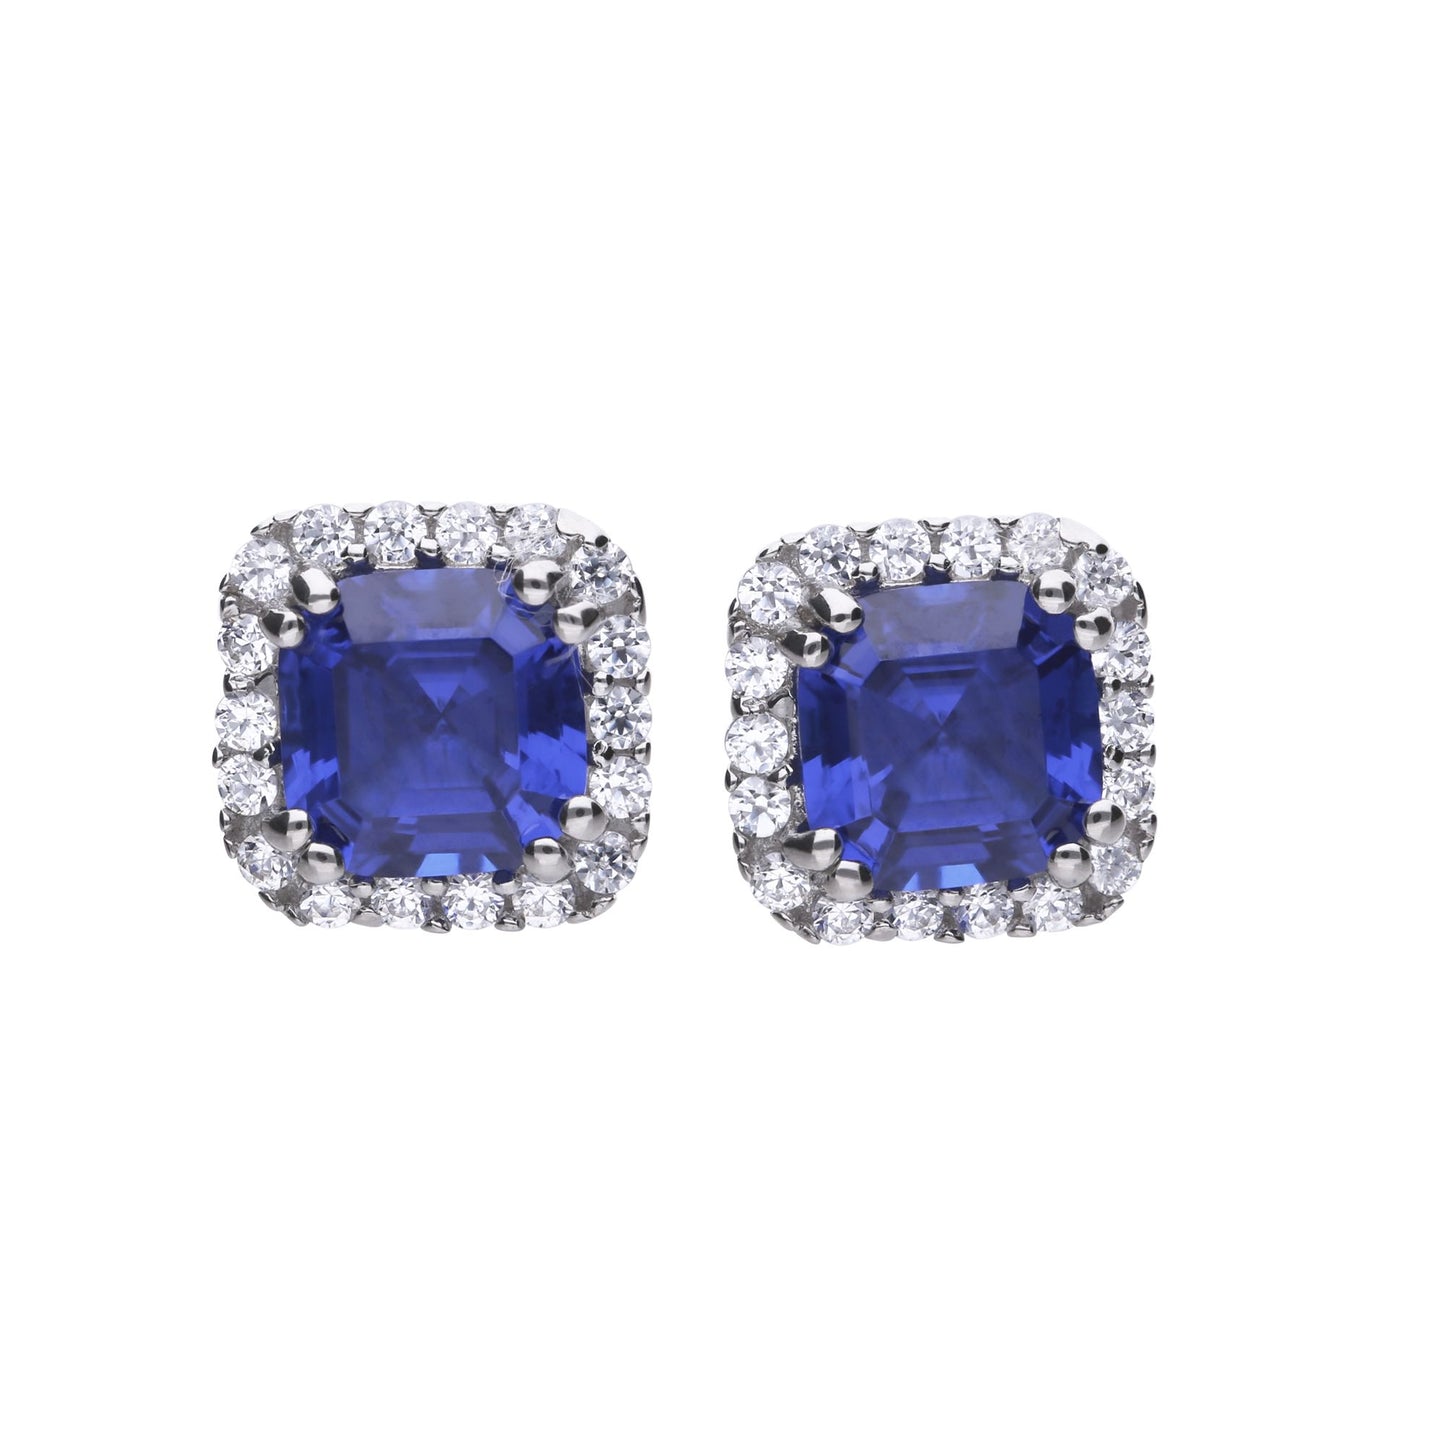 Diamonfire silver, blue and white cubic zirconia square stud earrings